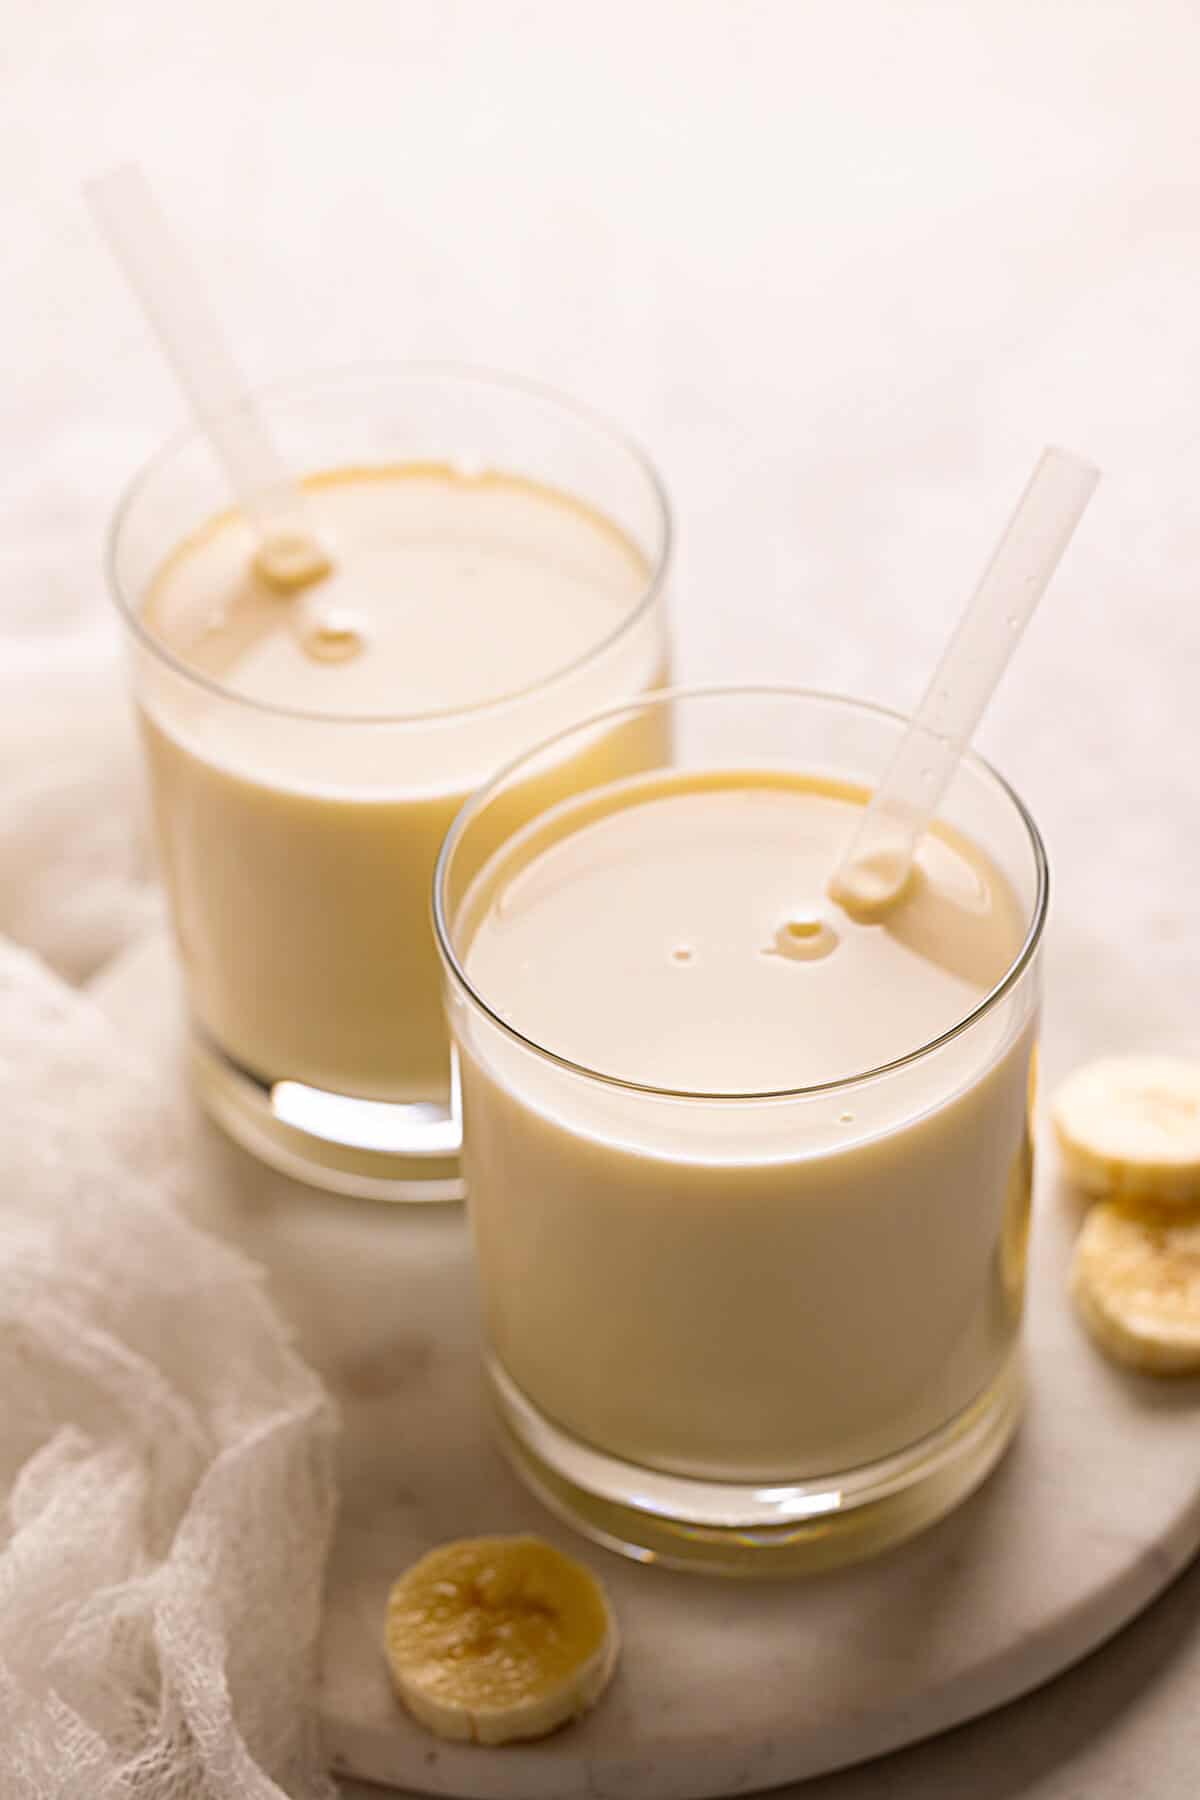 two glasses of banana milk with straws